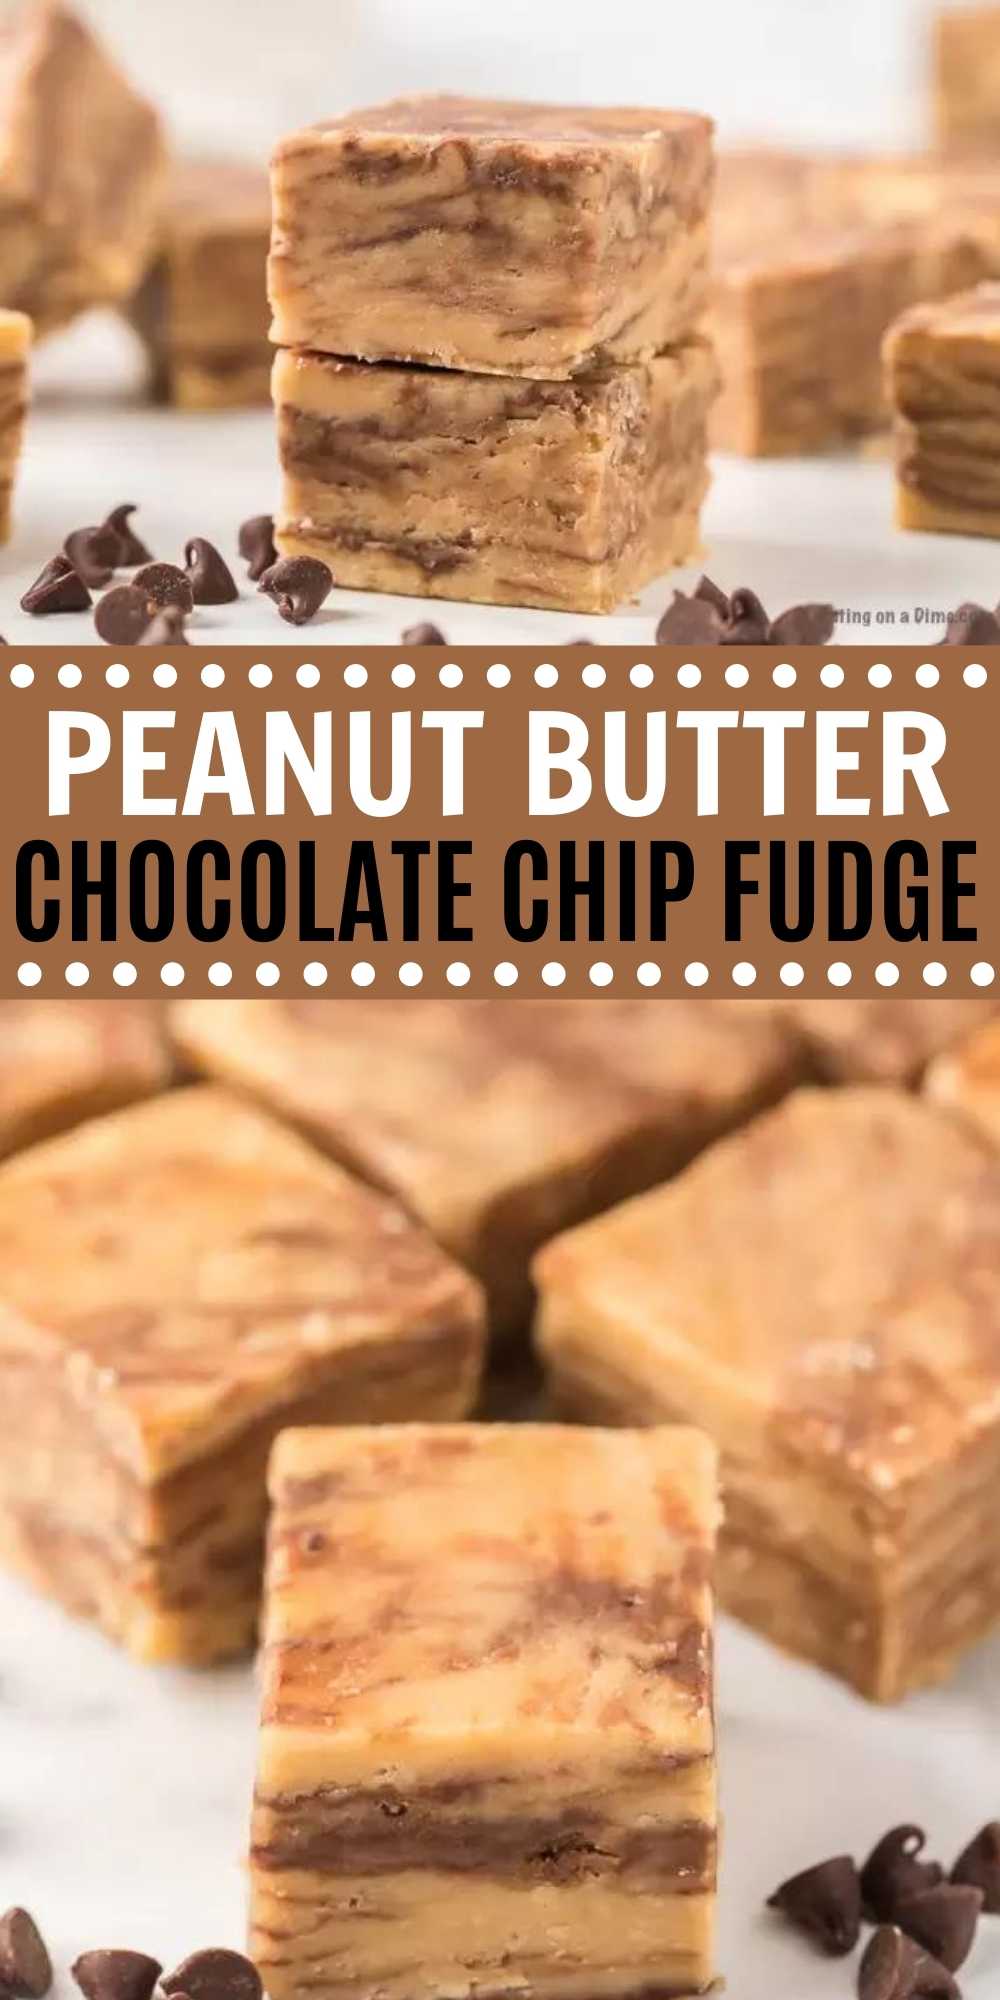 You have to try this easy 5 ingredient Peanut Butter Chocolate Chip Fudge Recipe. It is probably the easiest and most delicious Peanut Butter Fudge with chocolate you will try. This peanut butter and chocolate fudge recipes is easy to make and perfect for the holidays! #eatingonadime #fudgerecipes #peanutbutterrecipes #holidayrecipes 
